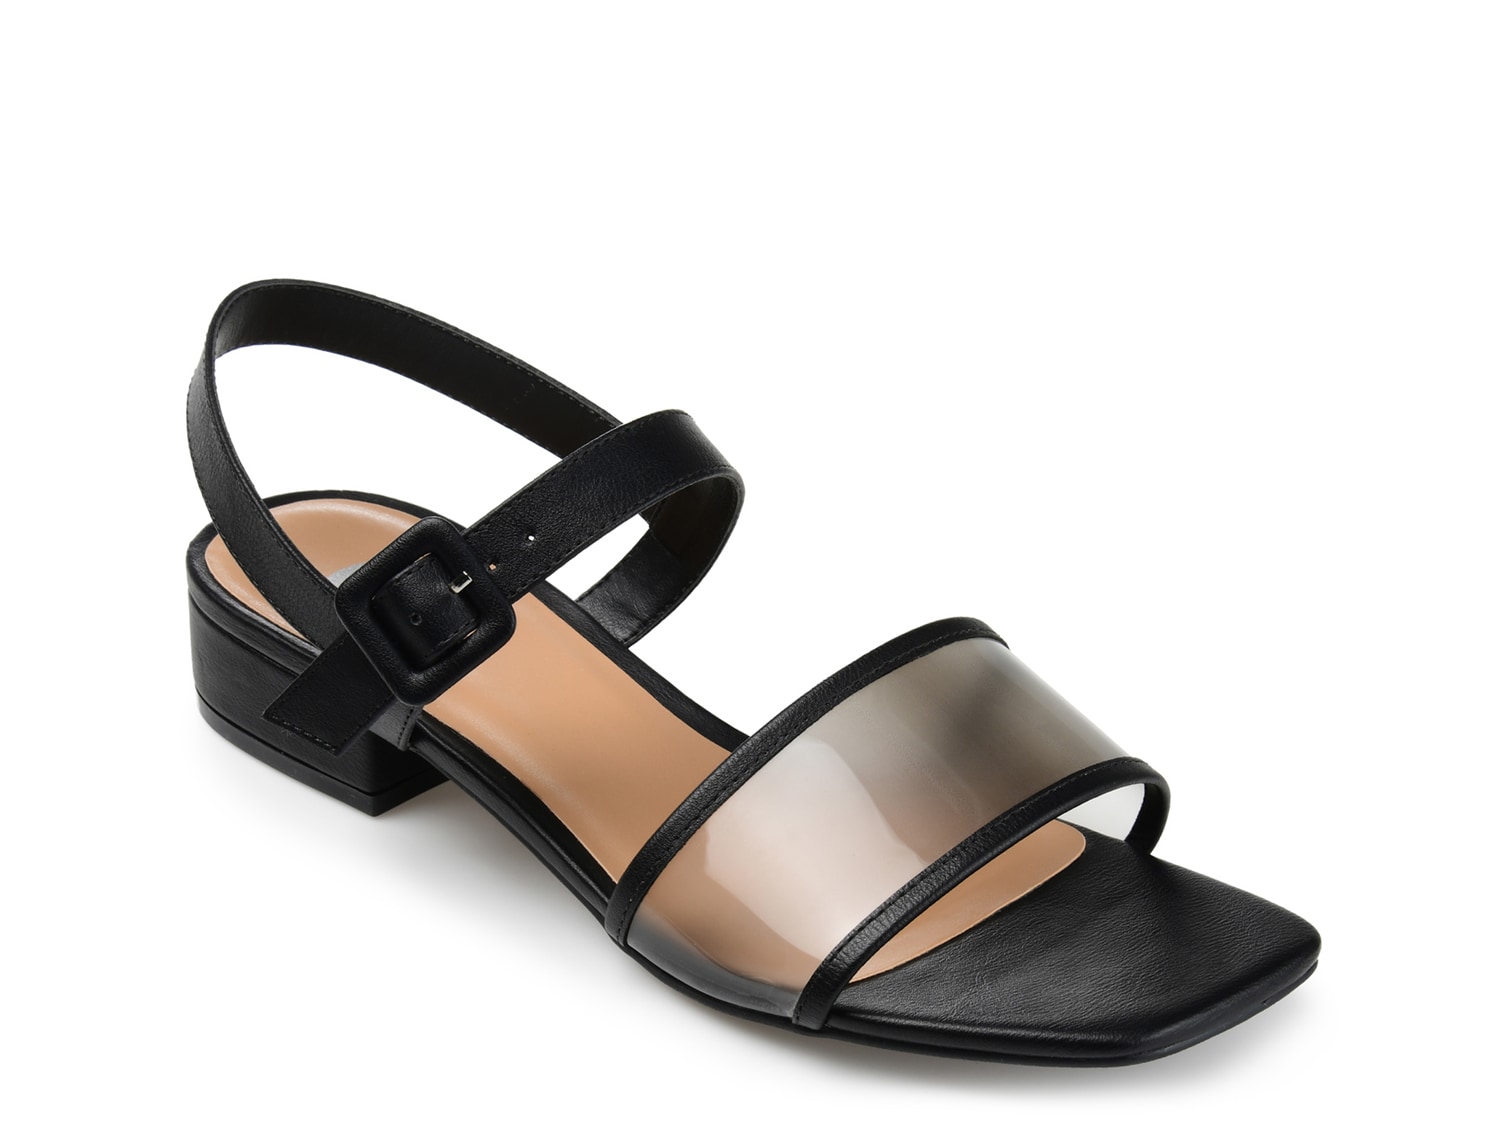 Journee Collection Dorothy Sandal - Free Shipping | DSW